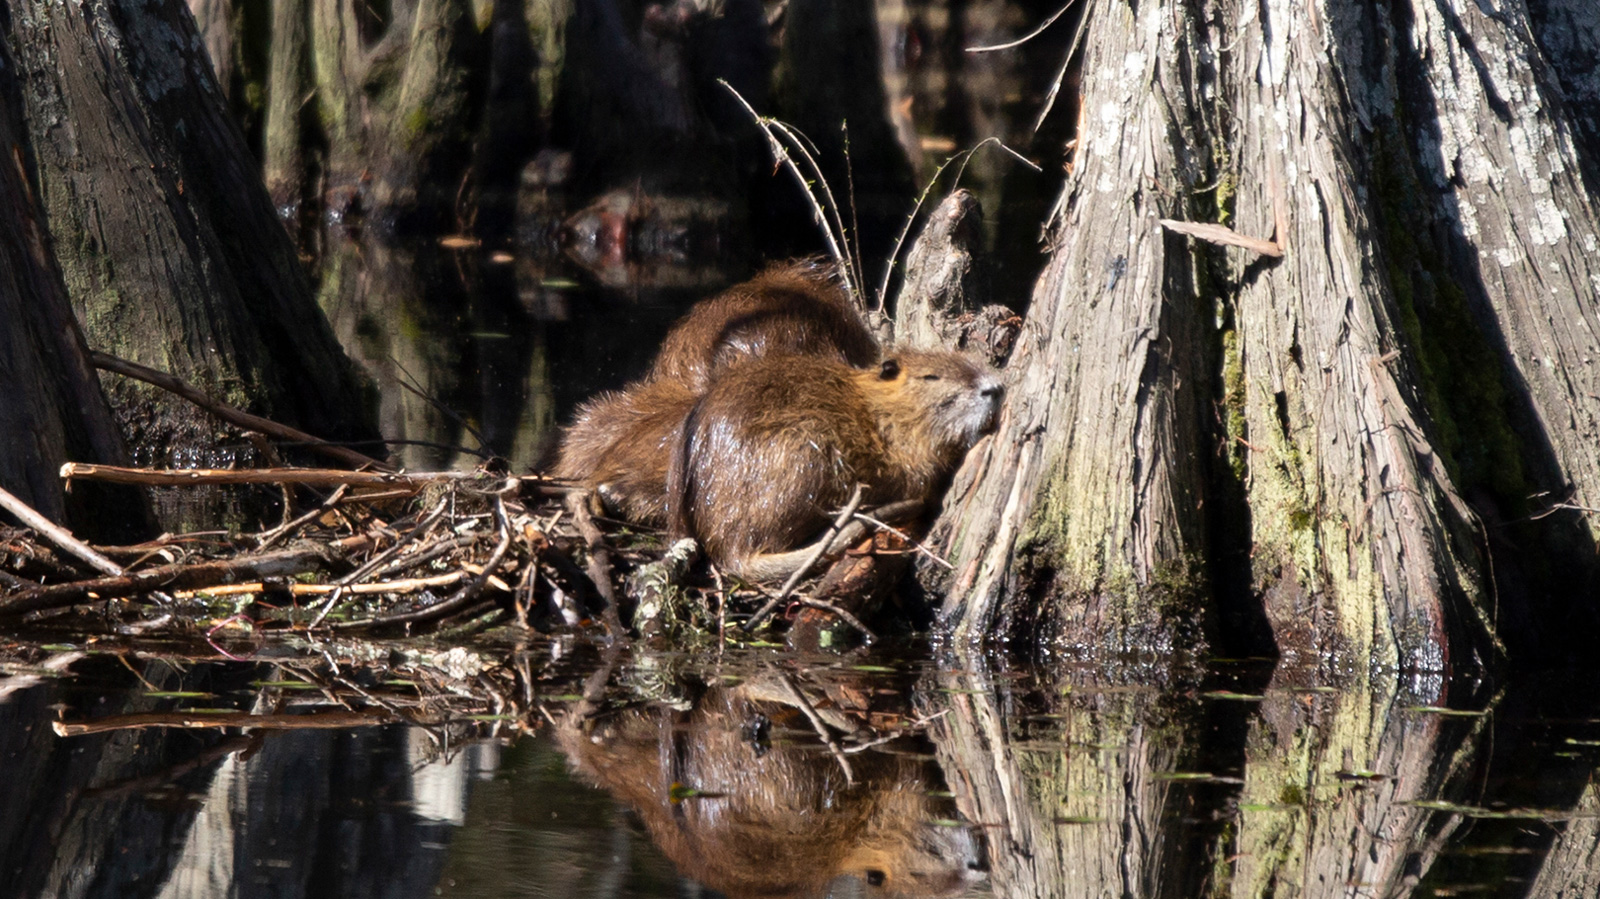 Nutria resting near water with their reflections